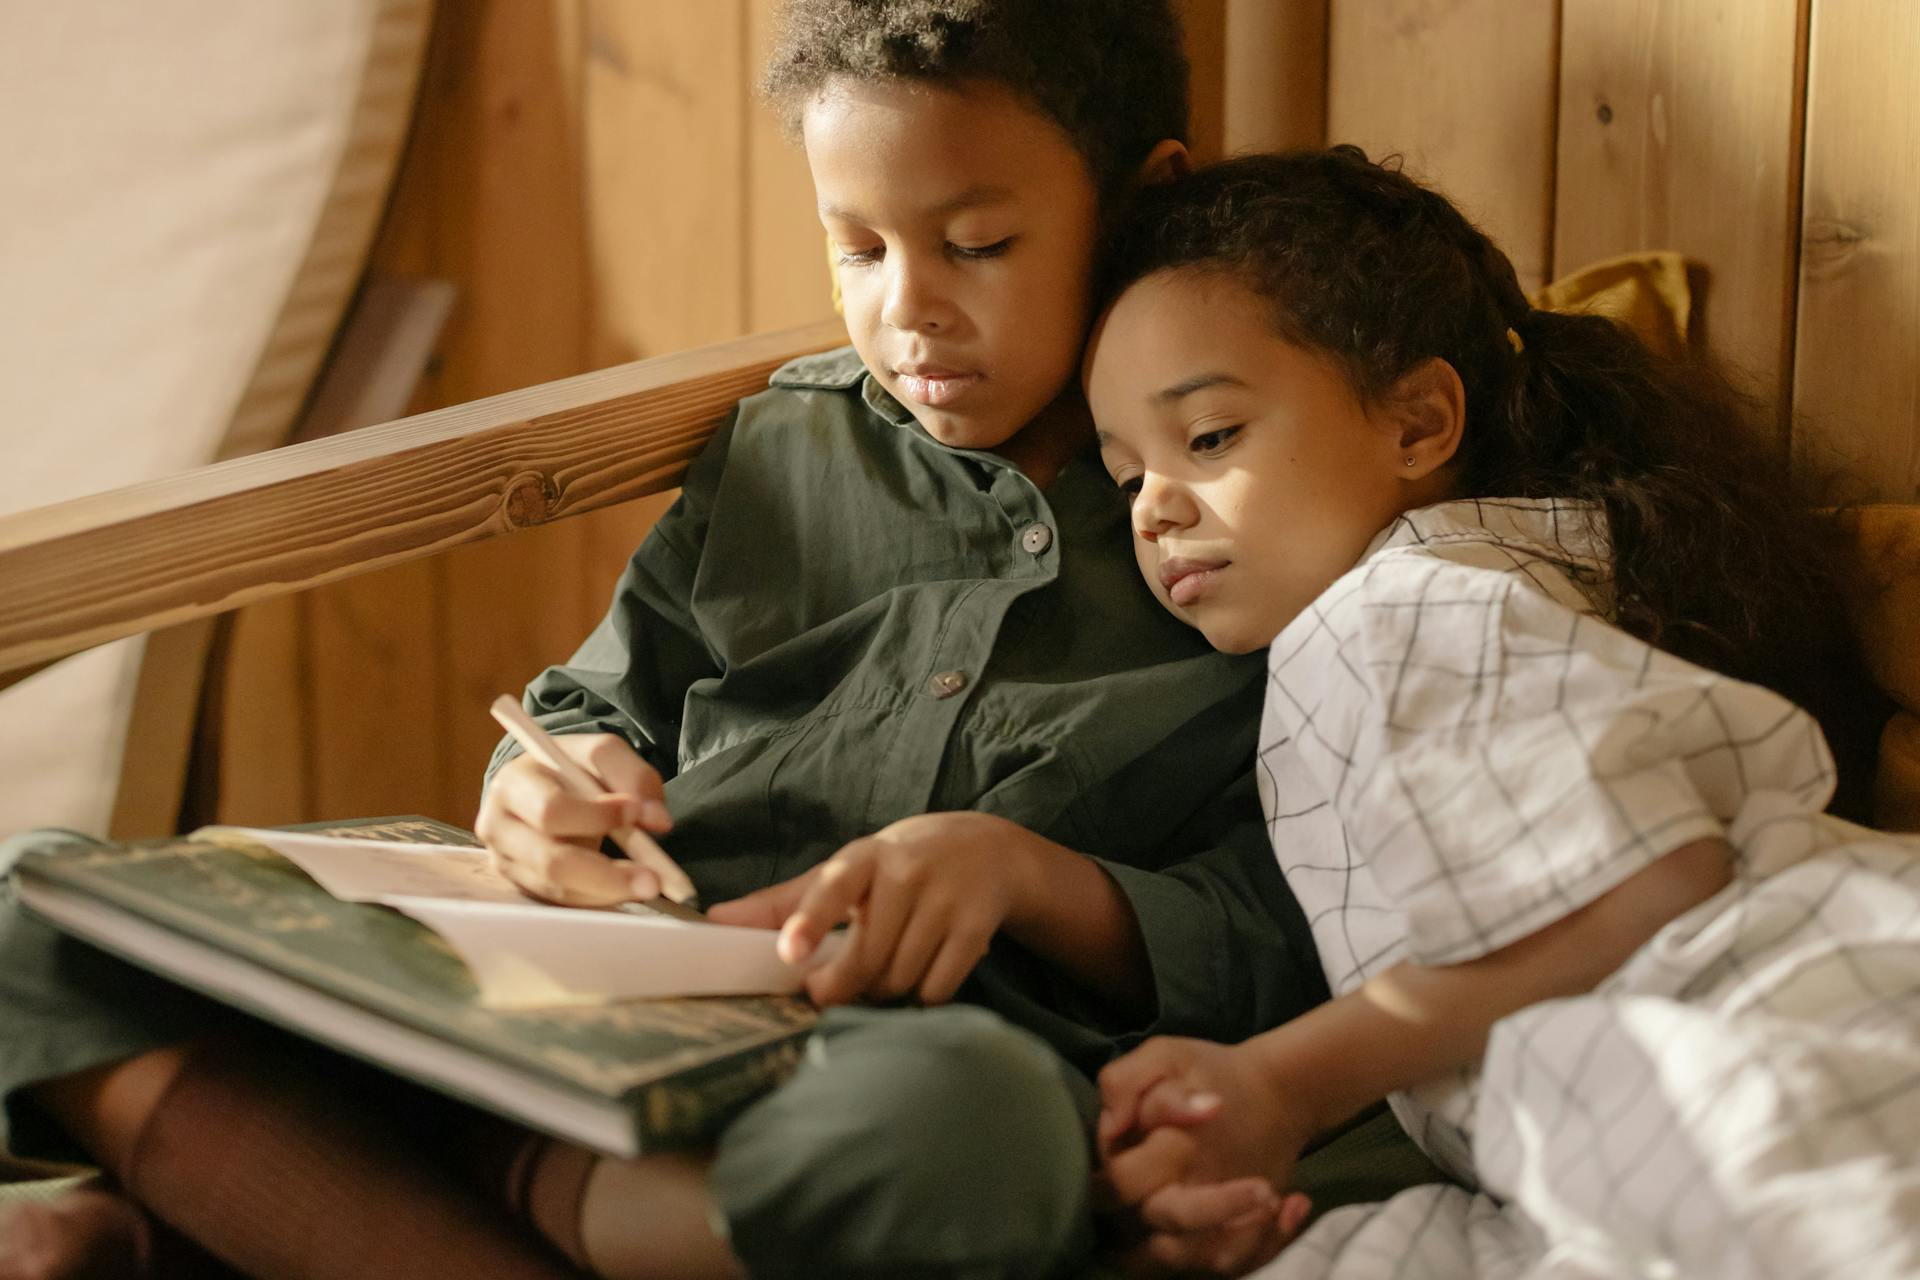 A boy and girl reading | Source: Pexels